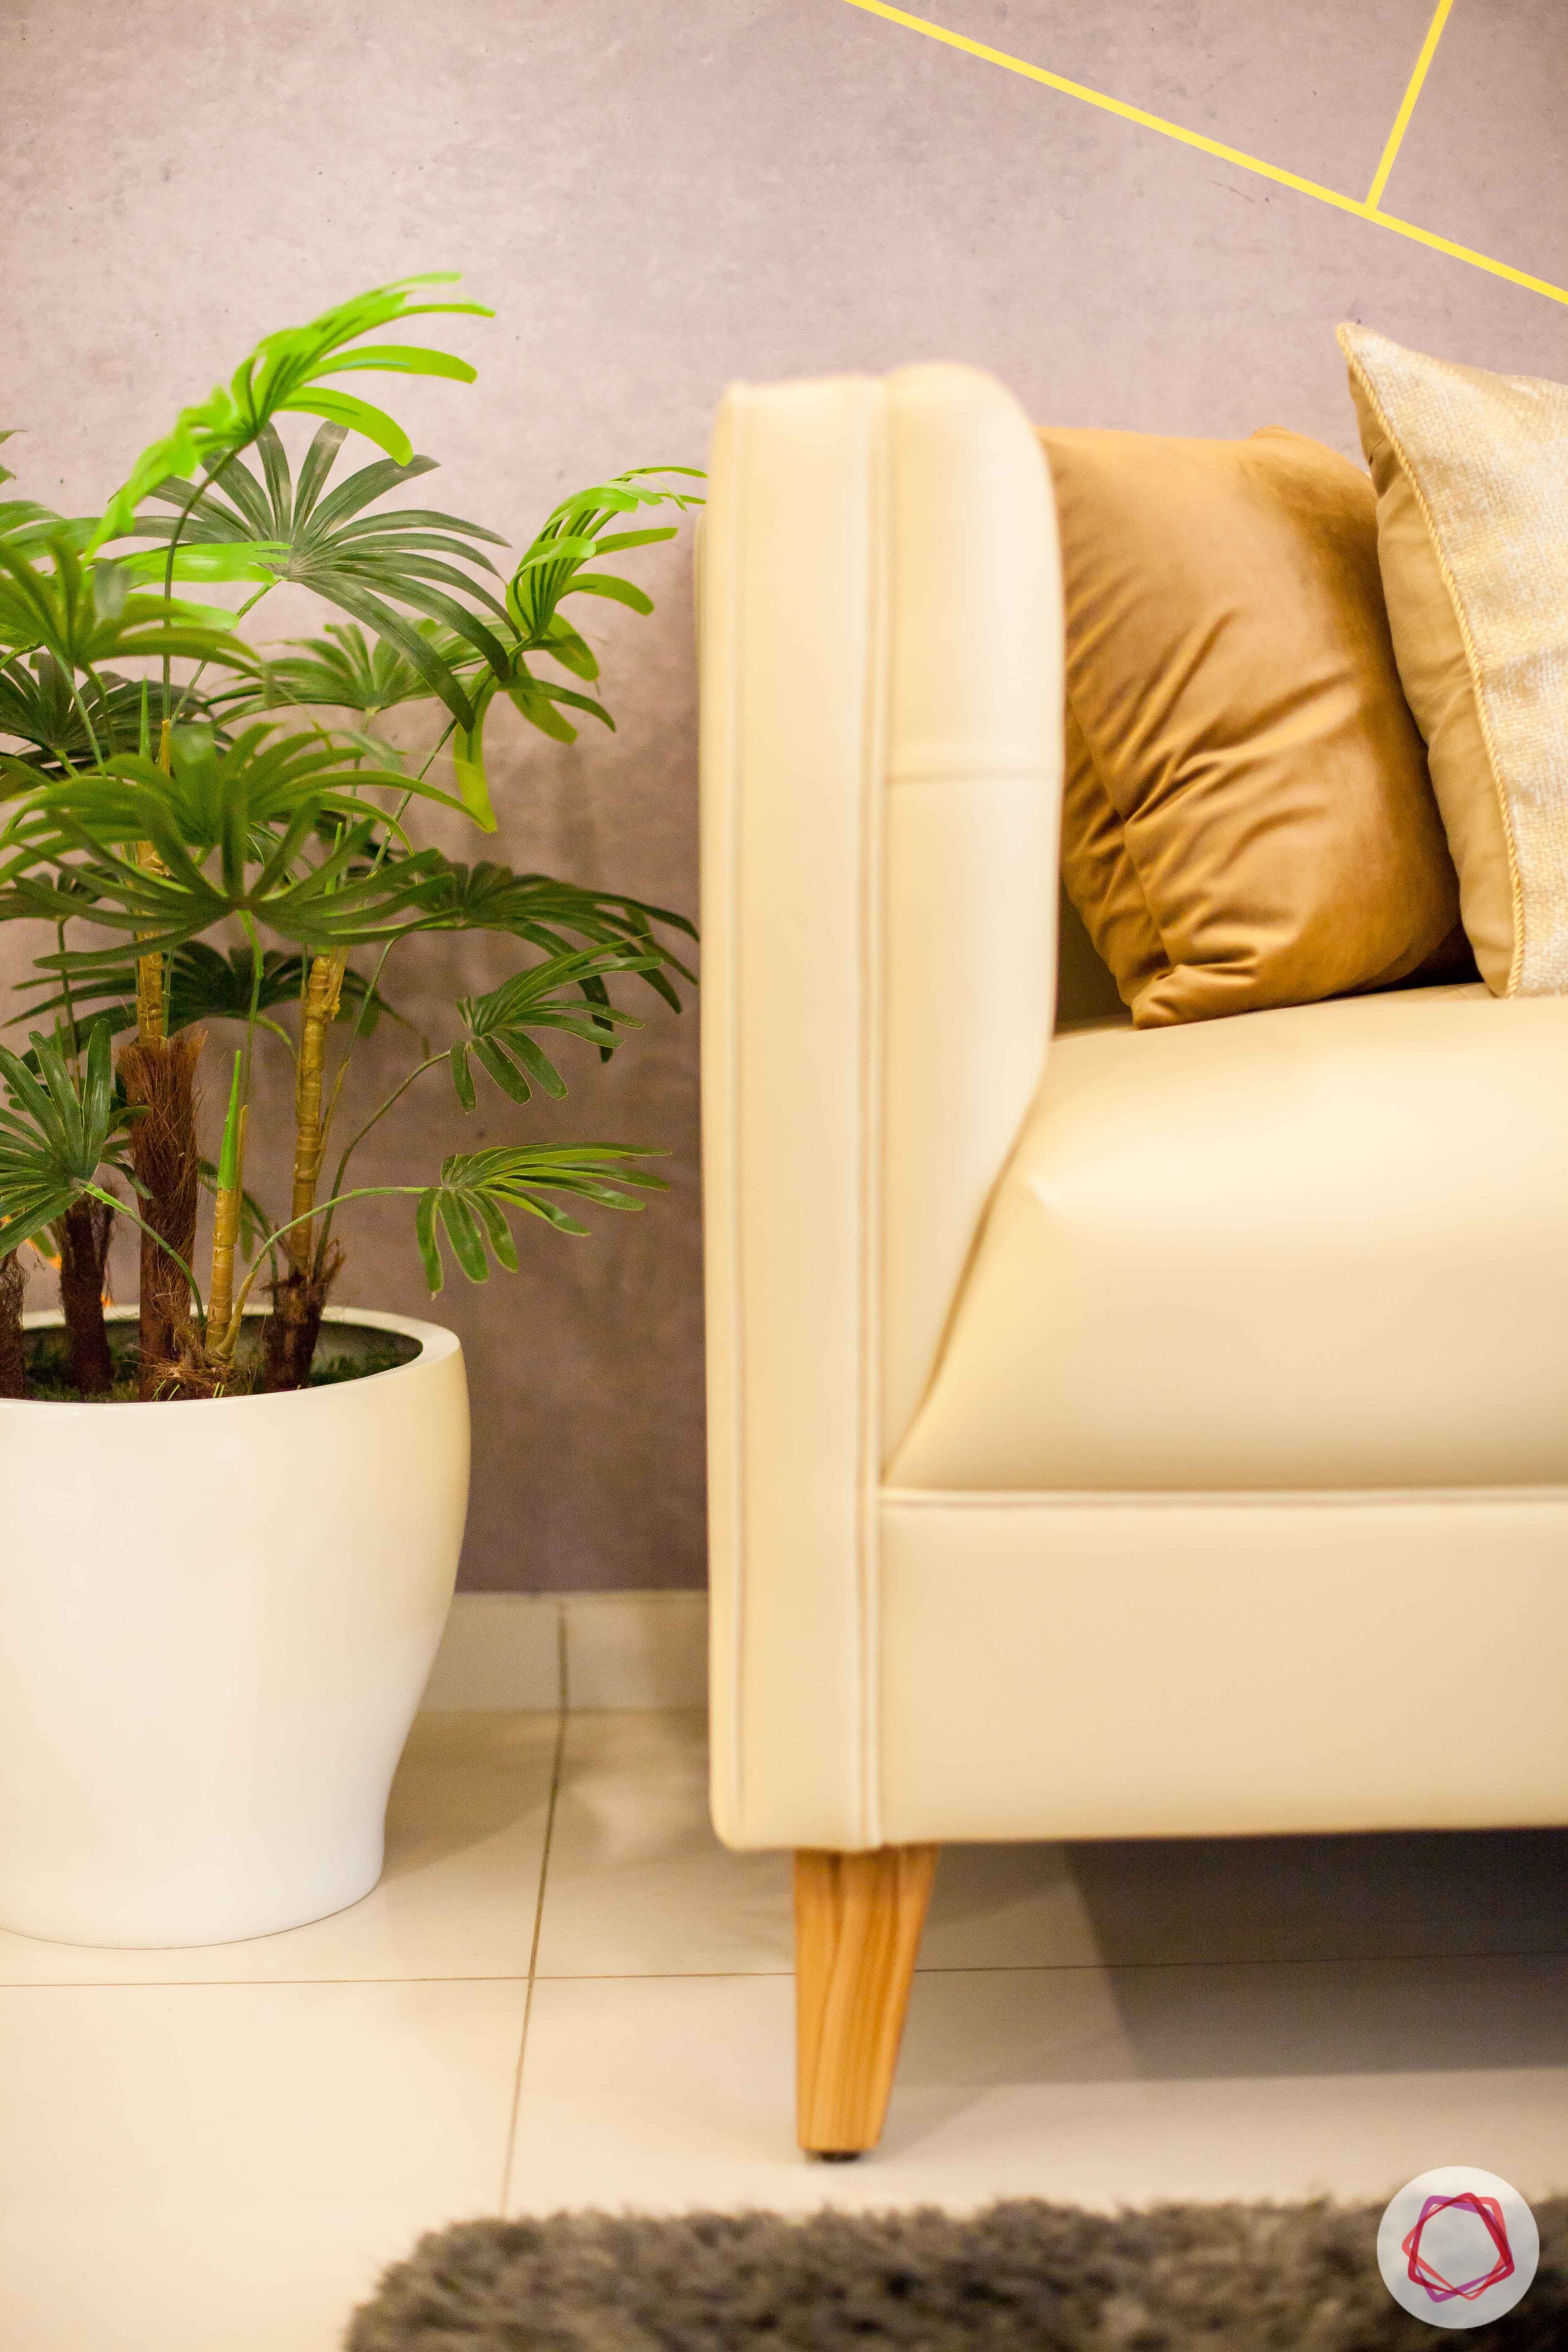 2bhk pune-grey wallpaper-potted plant